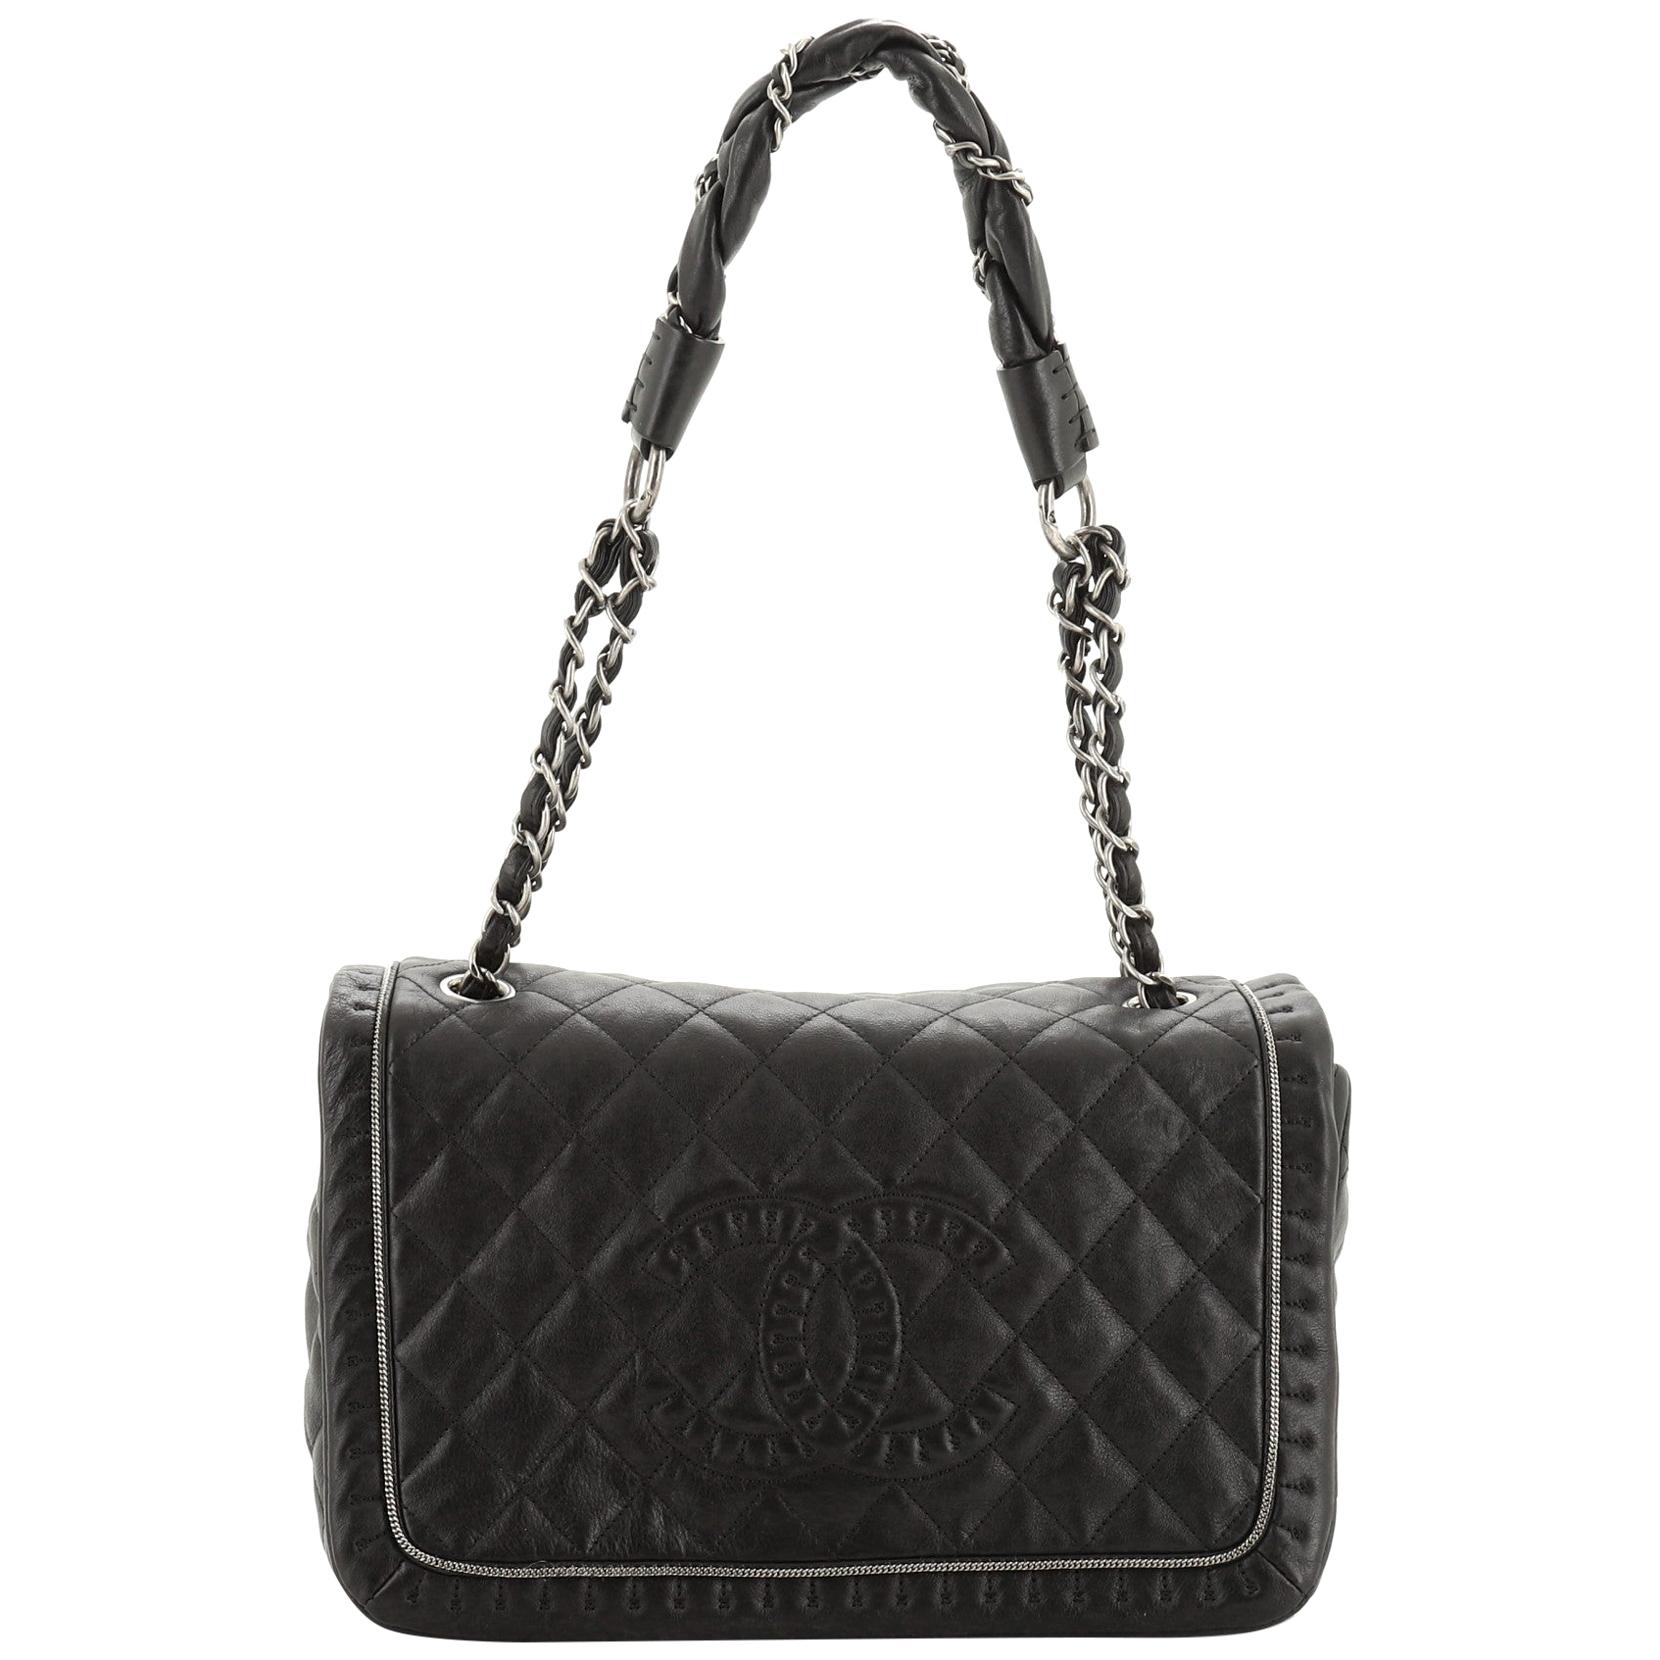 Chanel Istanbul Flap Bag Quilted Leather Medium